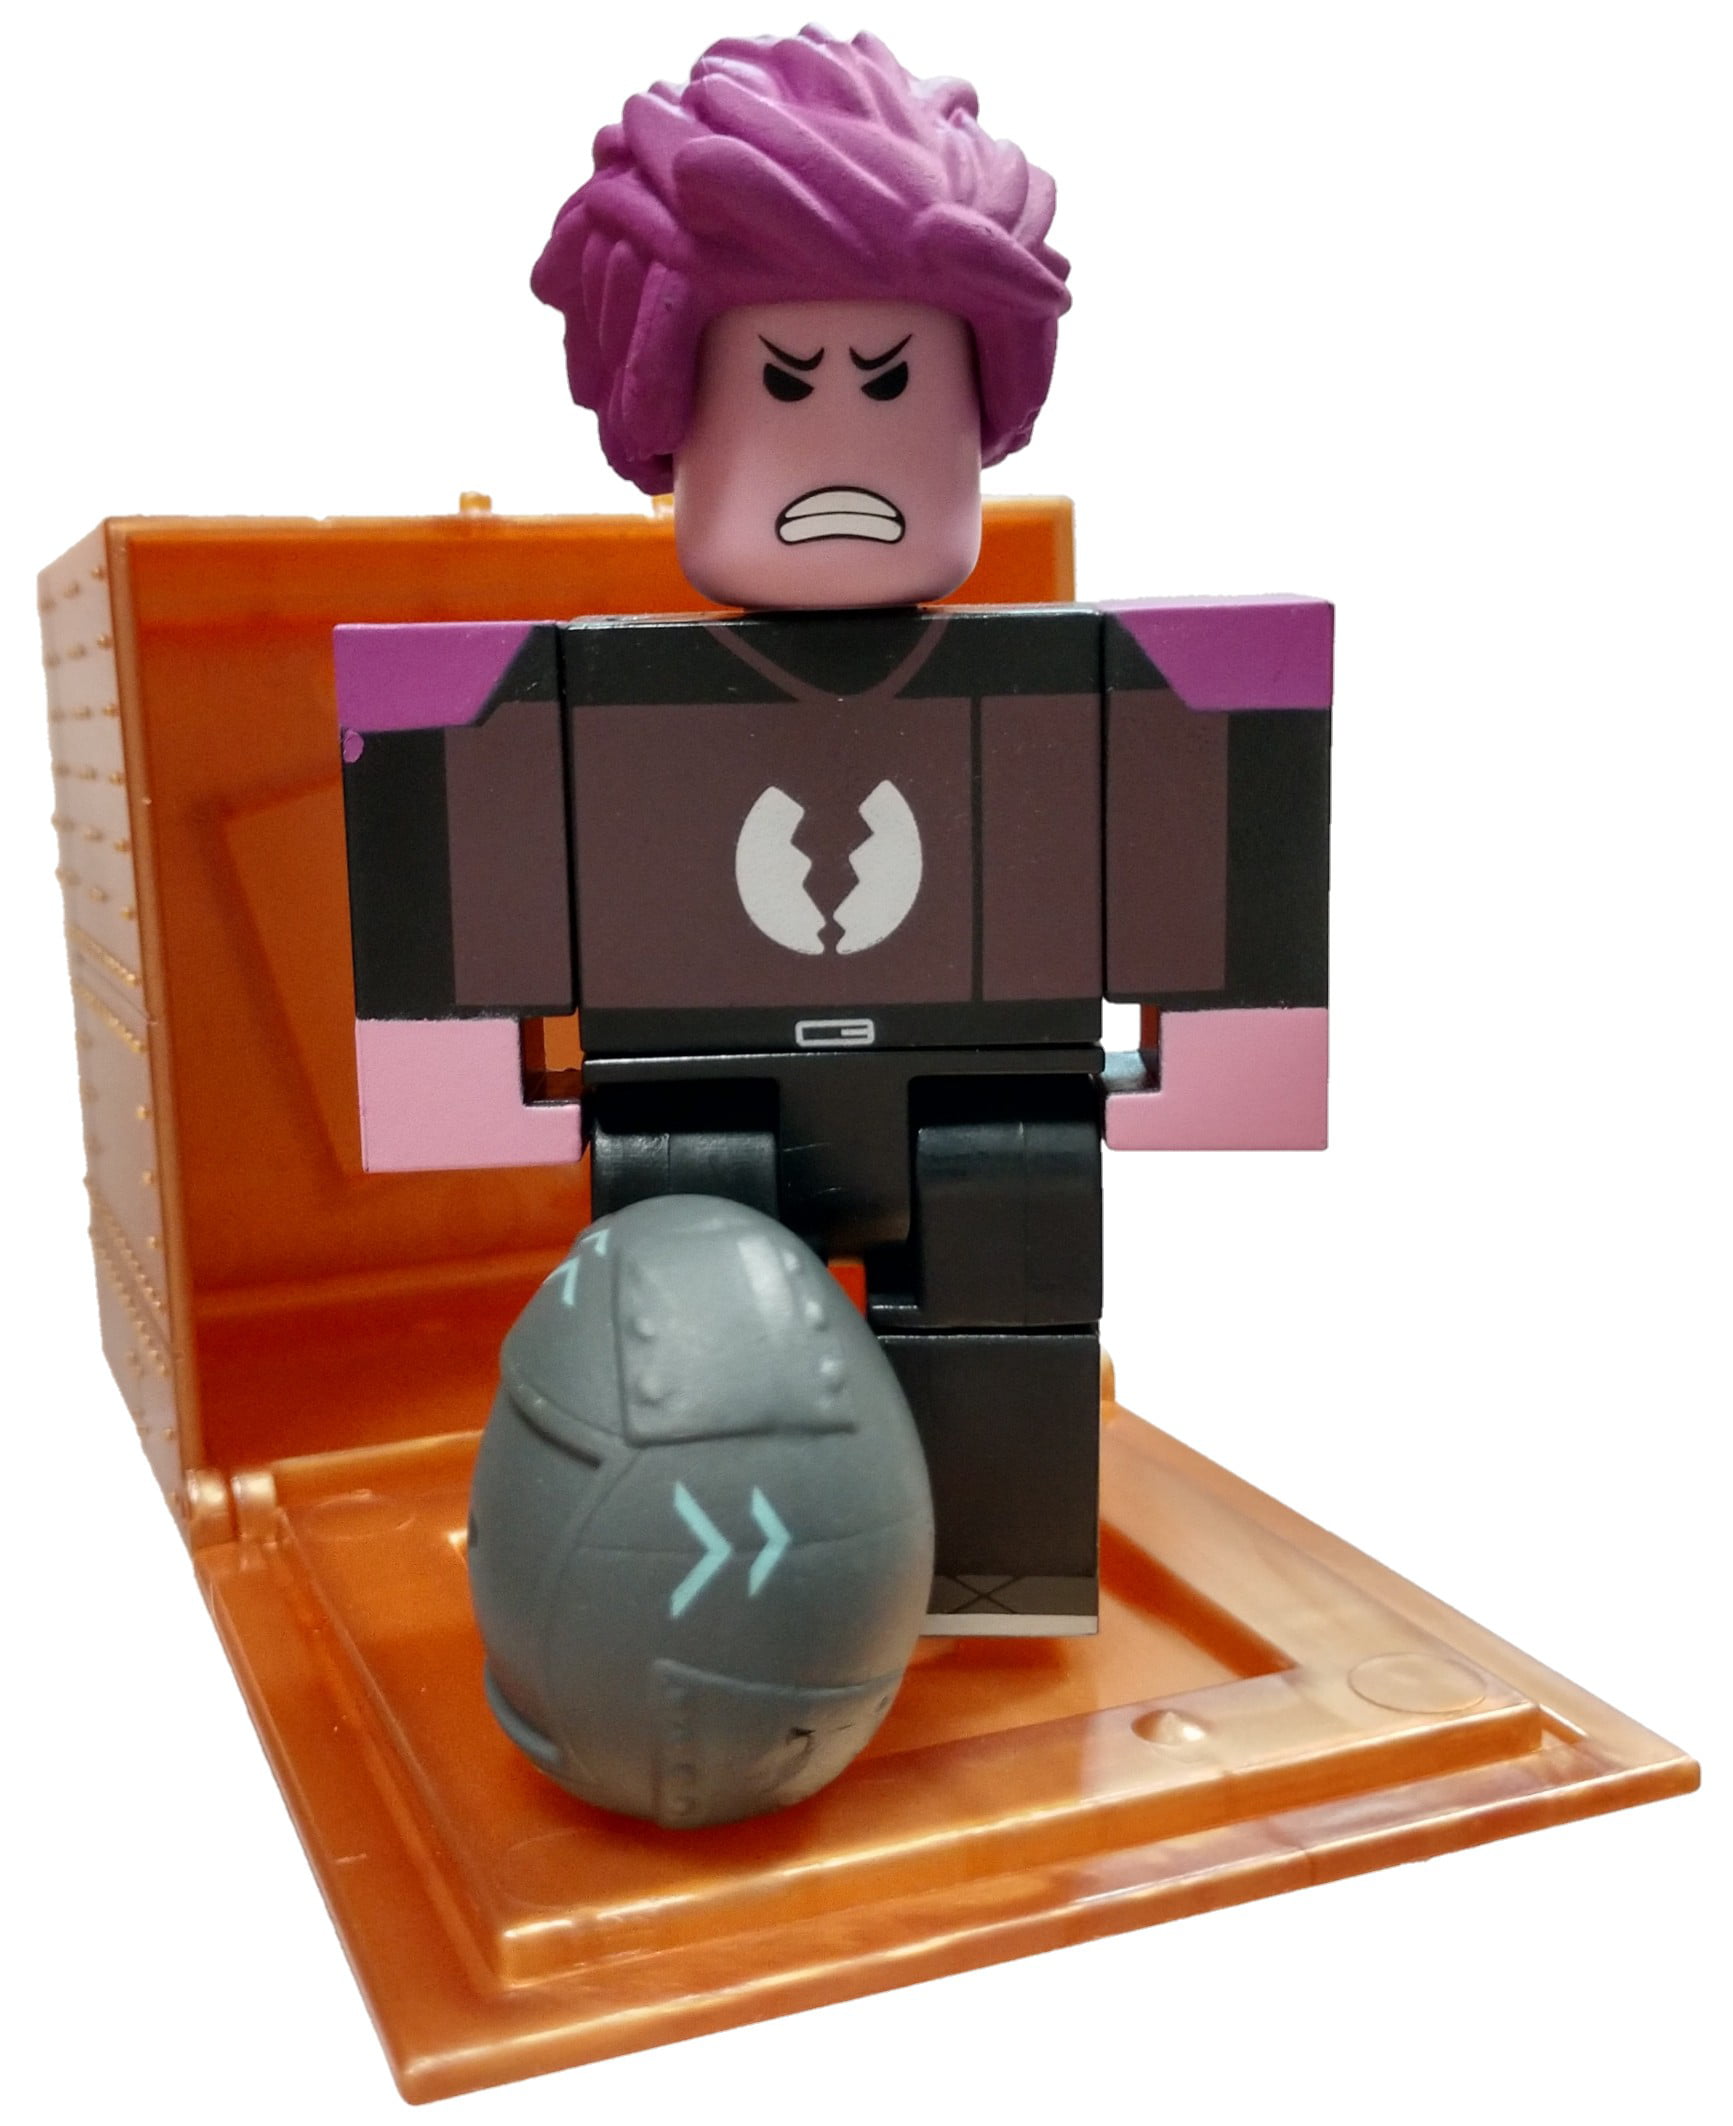 Roblox Series 8 Egg Hunt 2019 Evil Eggwick Mini Figure With Cube And Online Code No Packaging Walmart Com Walmart Com - egg hunt items roblox